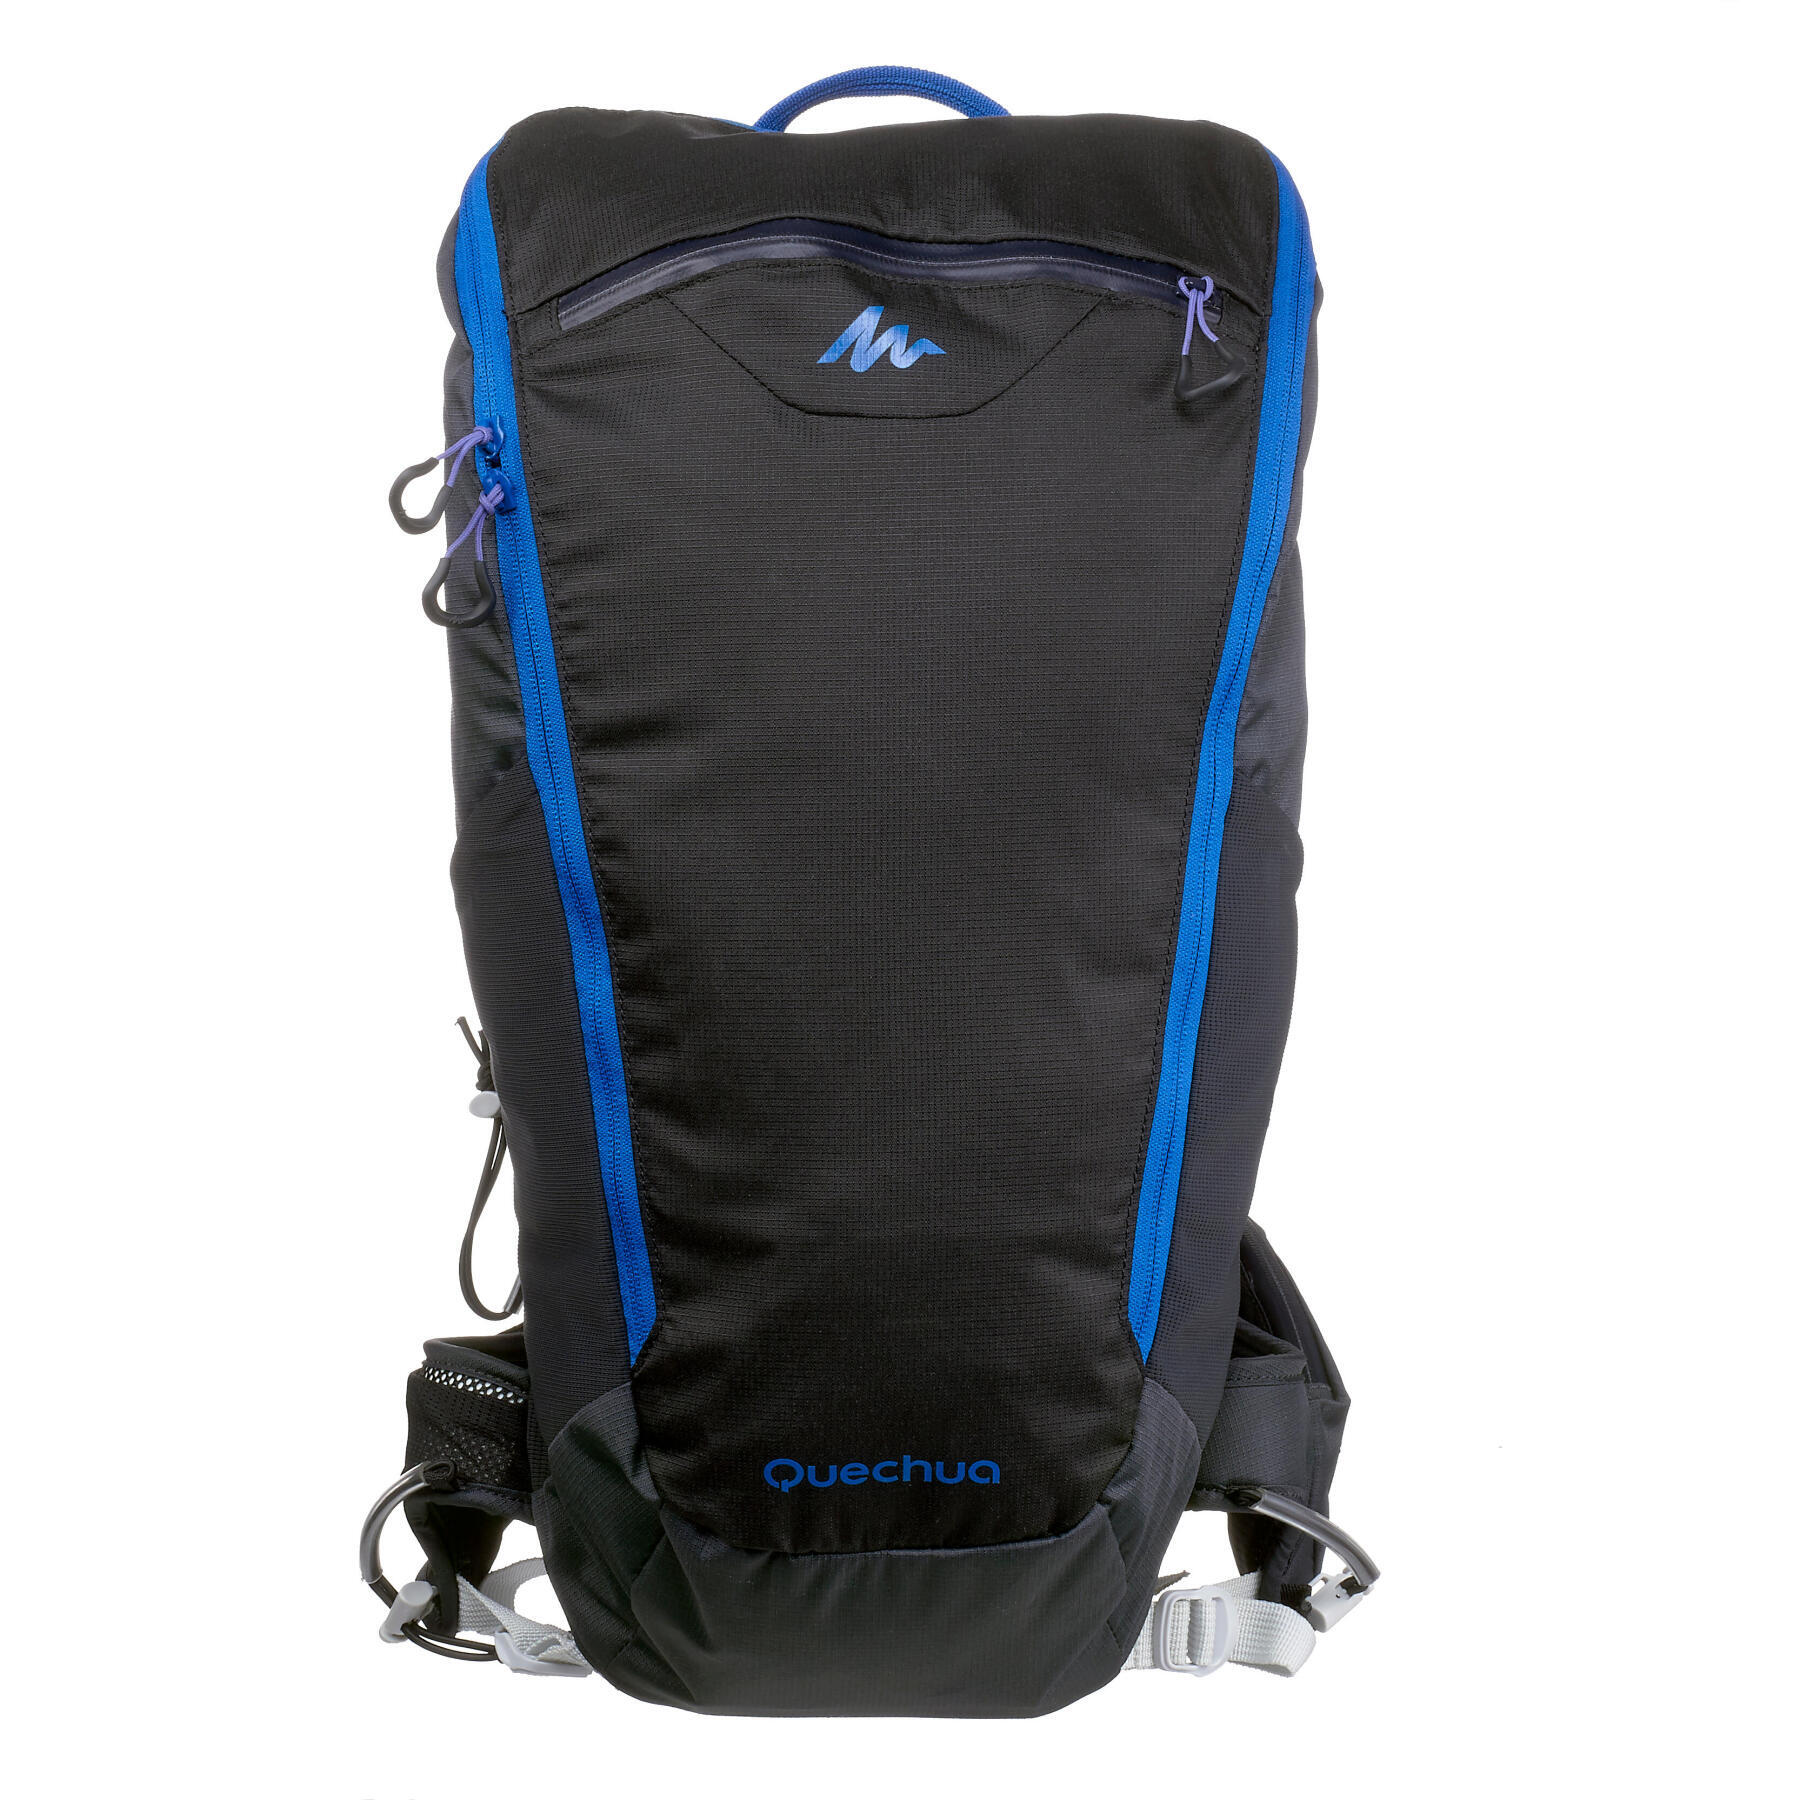 Quechua 20 L Hiking Bag - Buy Quechua 20 L Hiking Bag Online at Low Price -  Snapdeal